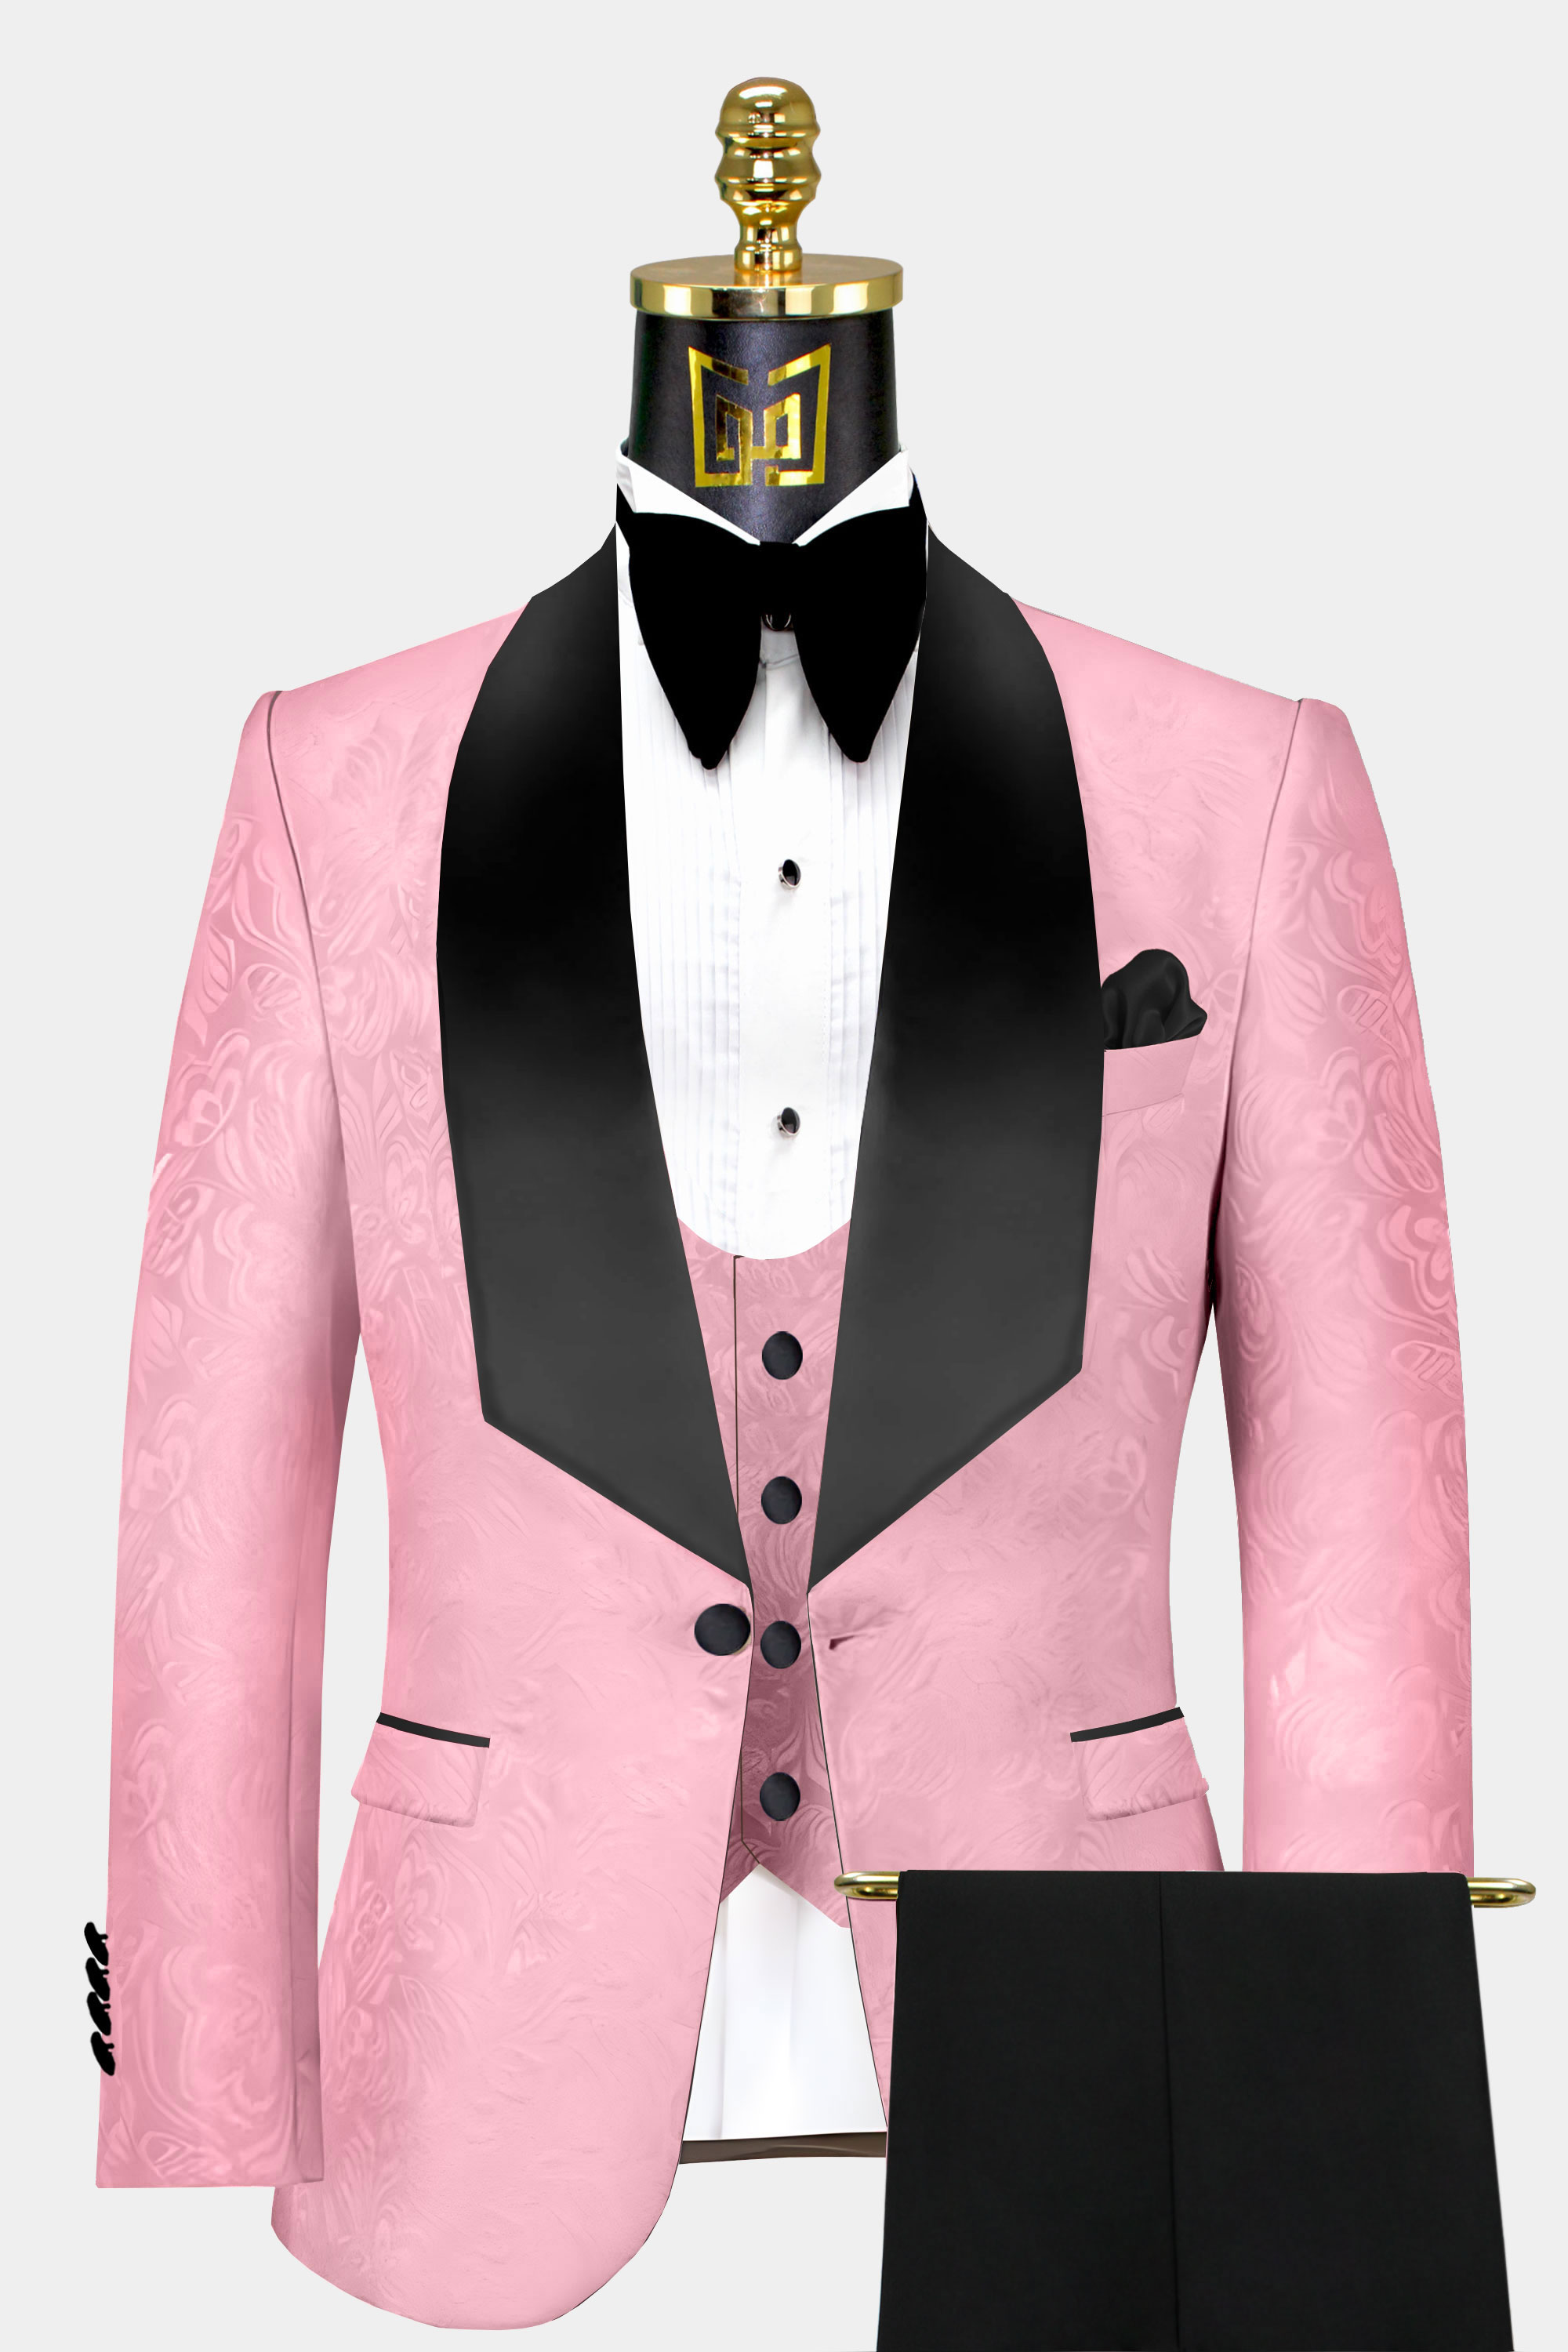 Valentine's Day Outfit Idea: A Hot Pink Tuxedo Suit!